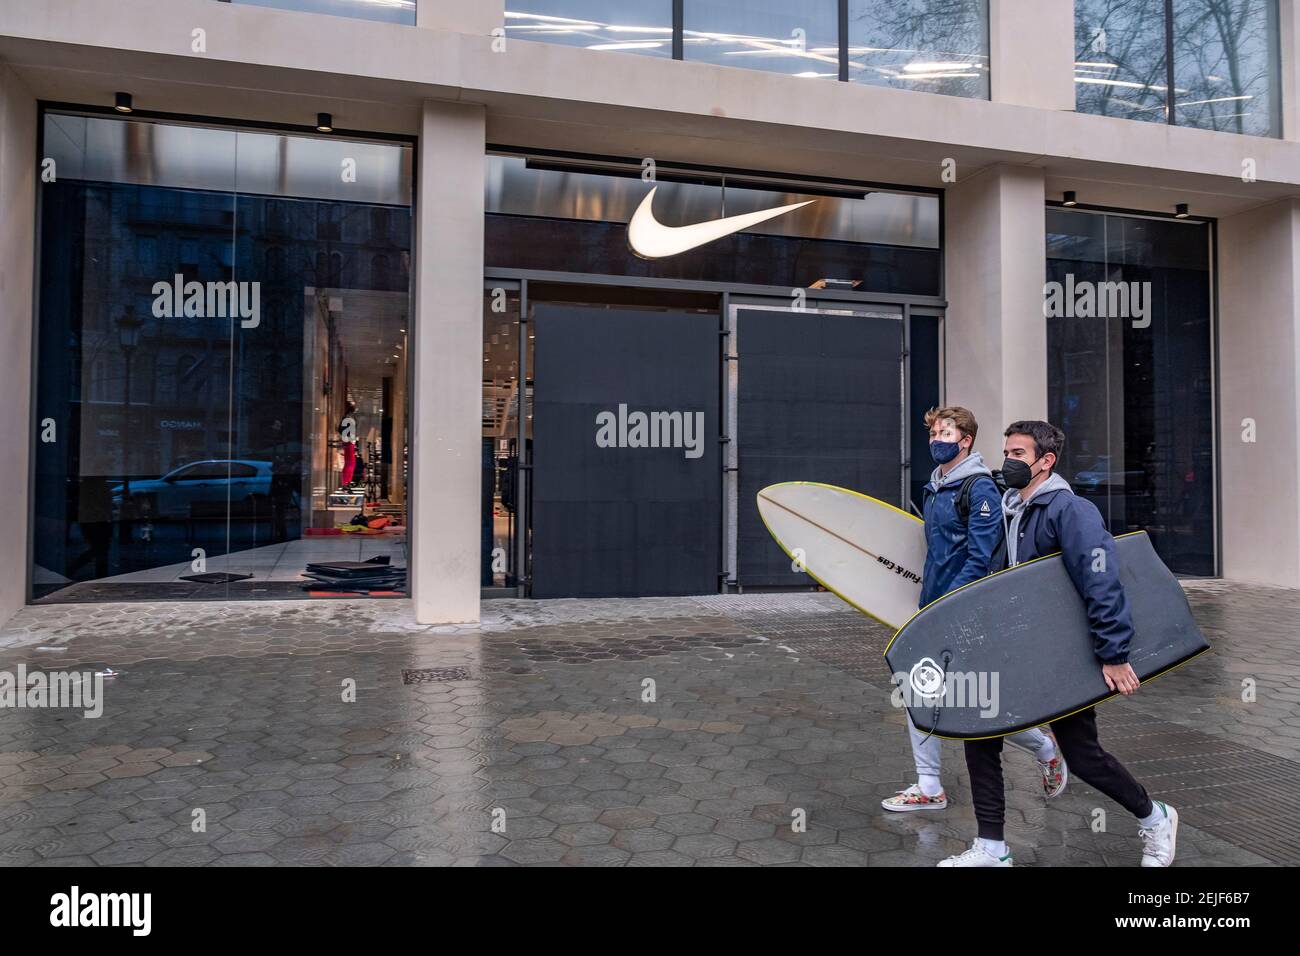 Barcelona, Spain. 22nd Feb, 2021. Two young men with surfboards walk past Nike  store in Passeig de Gràcia, seen with anti-vandalism protections in their  windows.More than 50 stores have suffered damage to